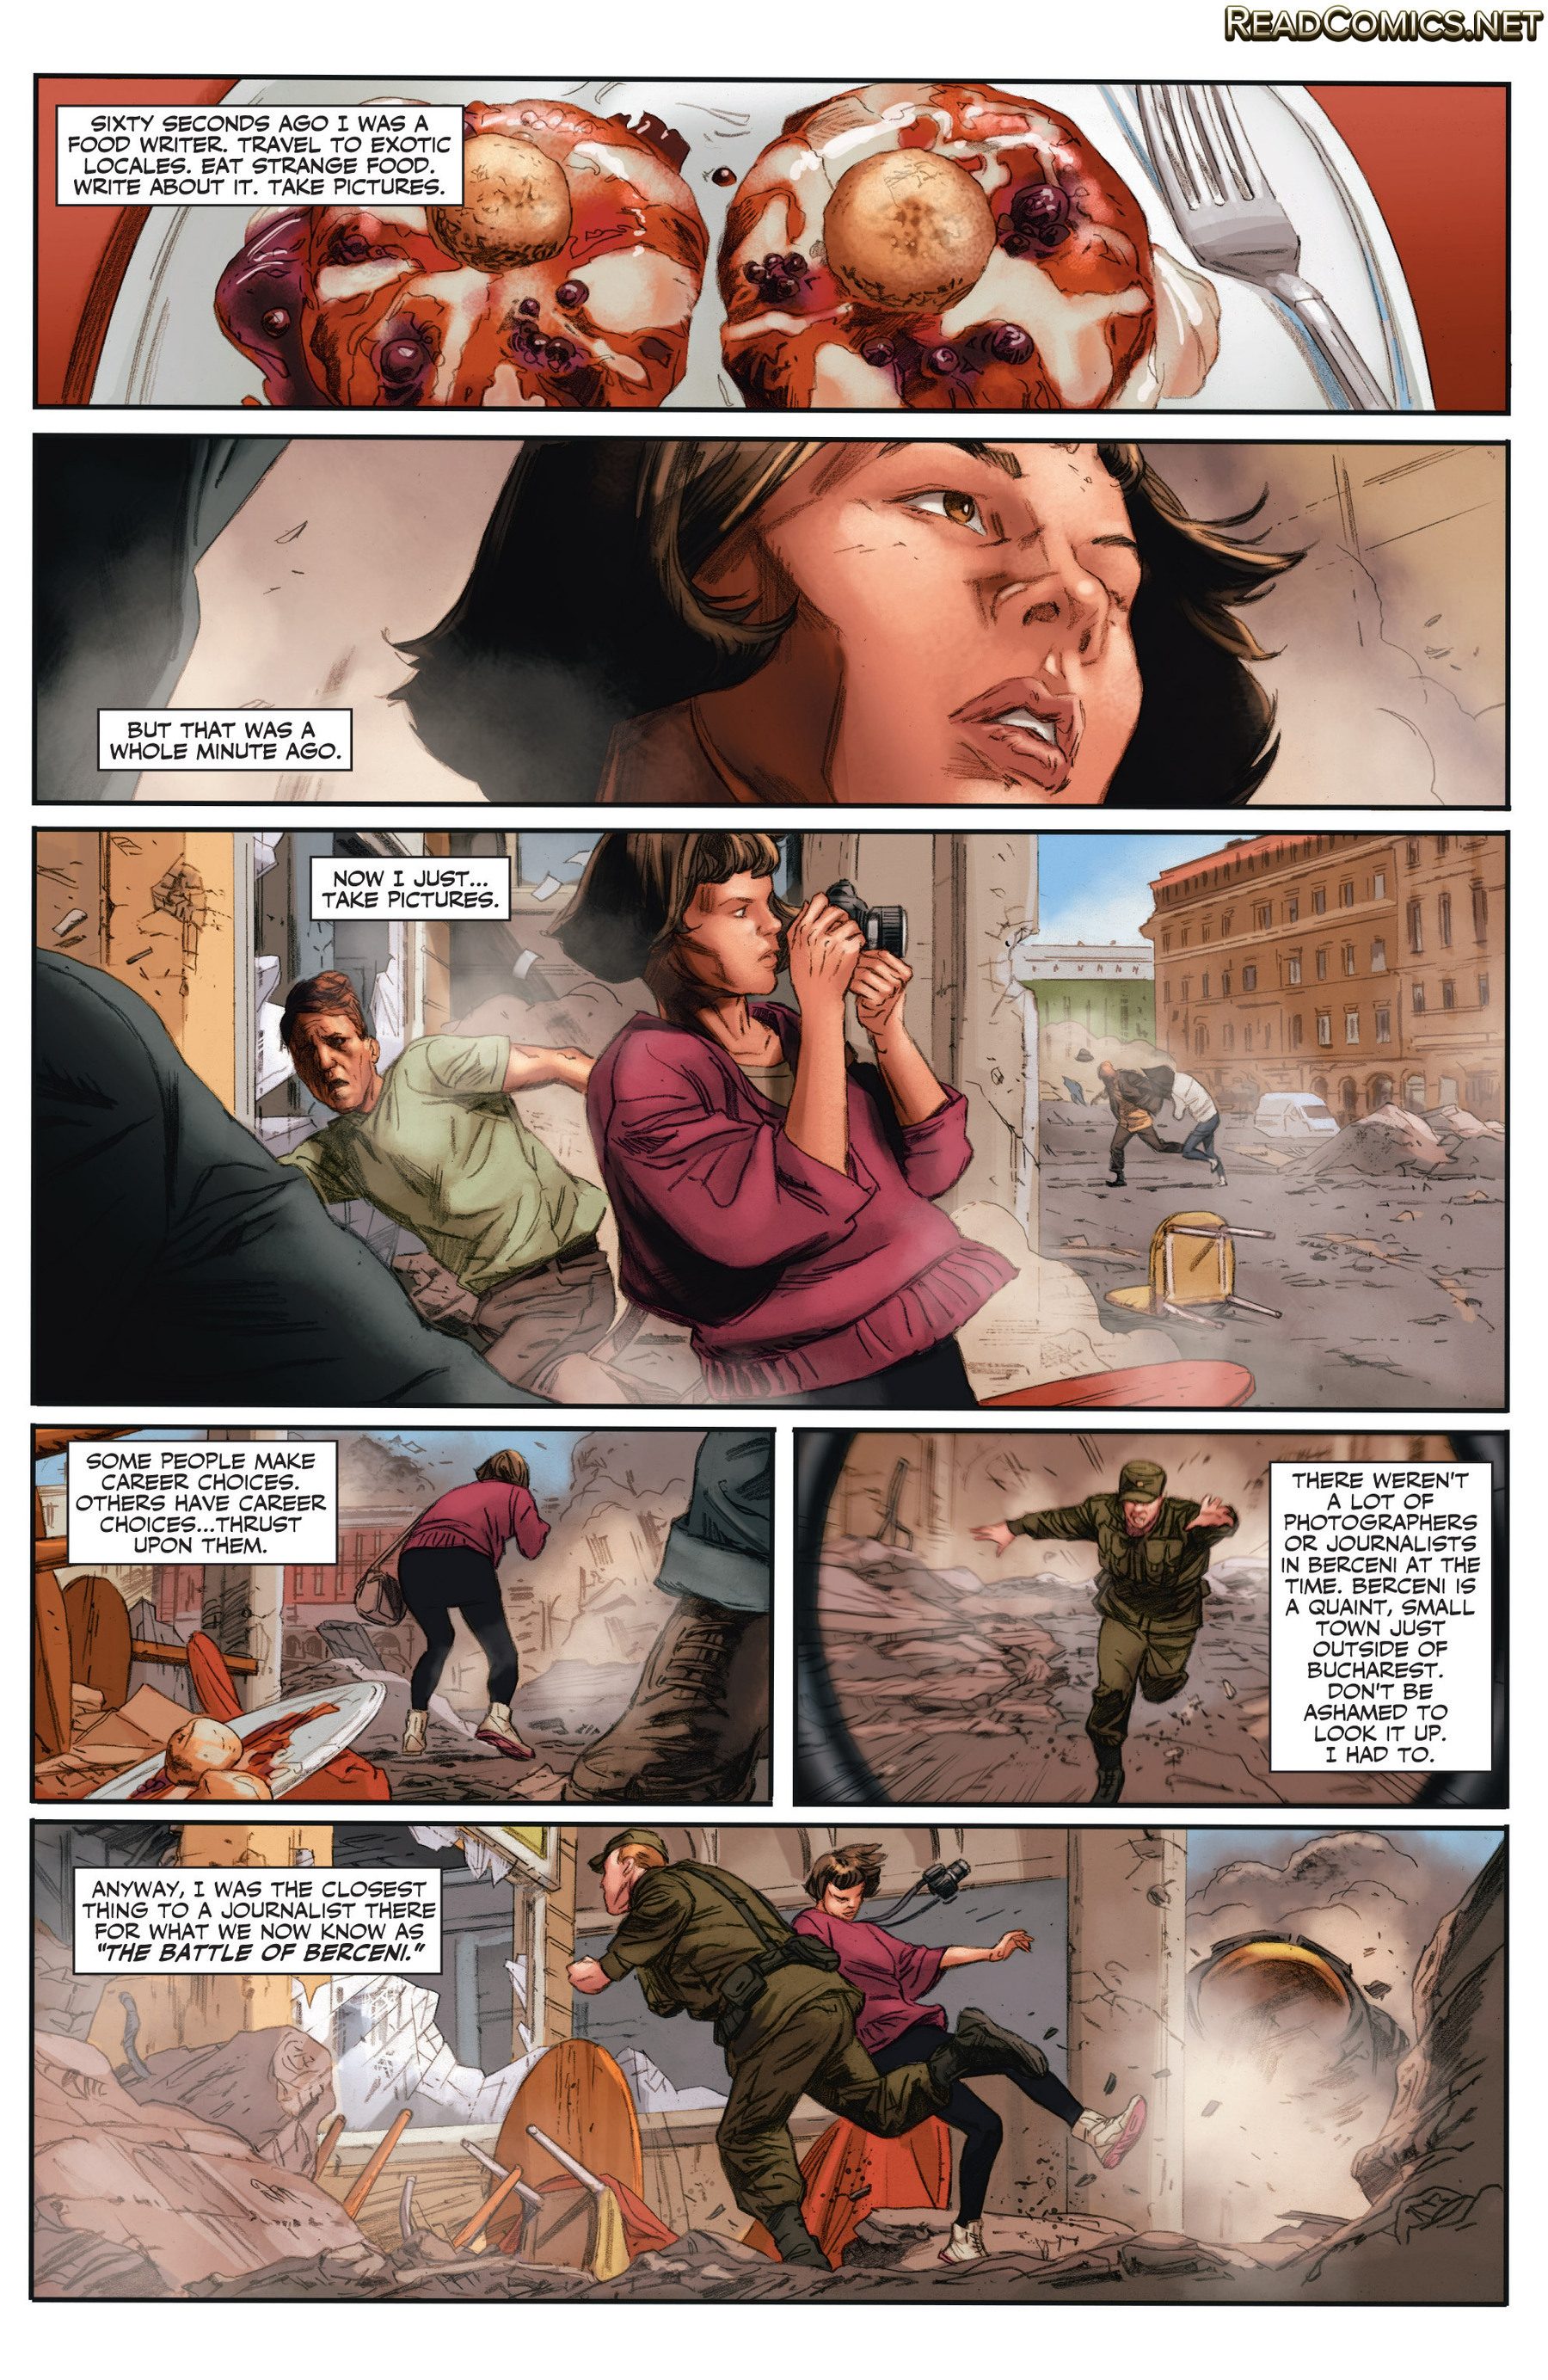 Unity (2013-): Chapter 1 - Page 3